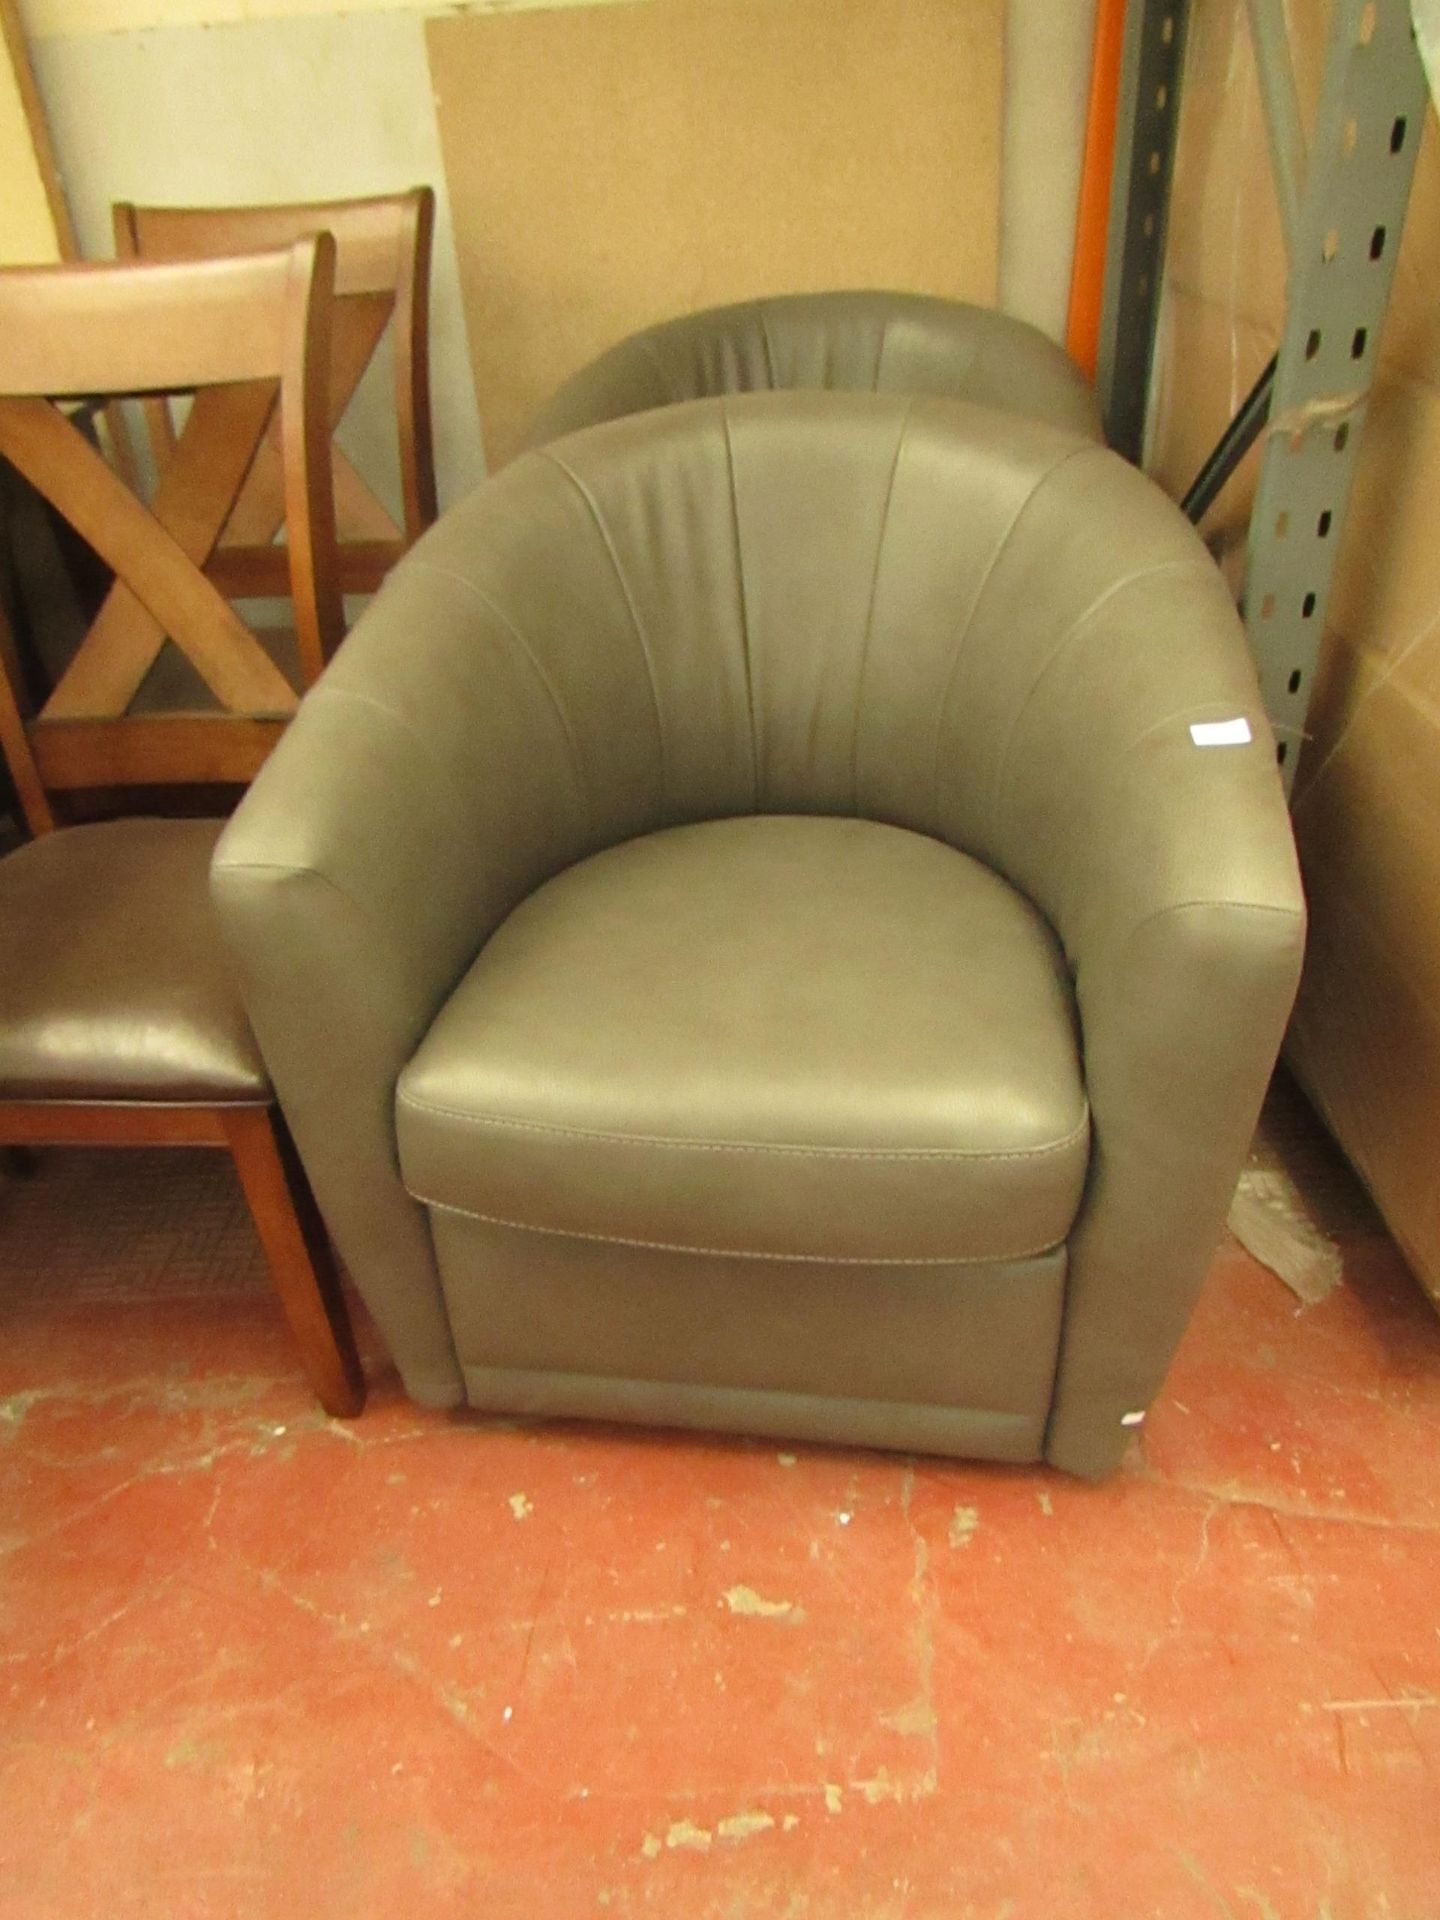 Natuzzi Accent swivel armchair in grey, no major damage to chair or swivel mechanism, RRP £349